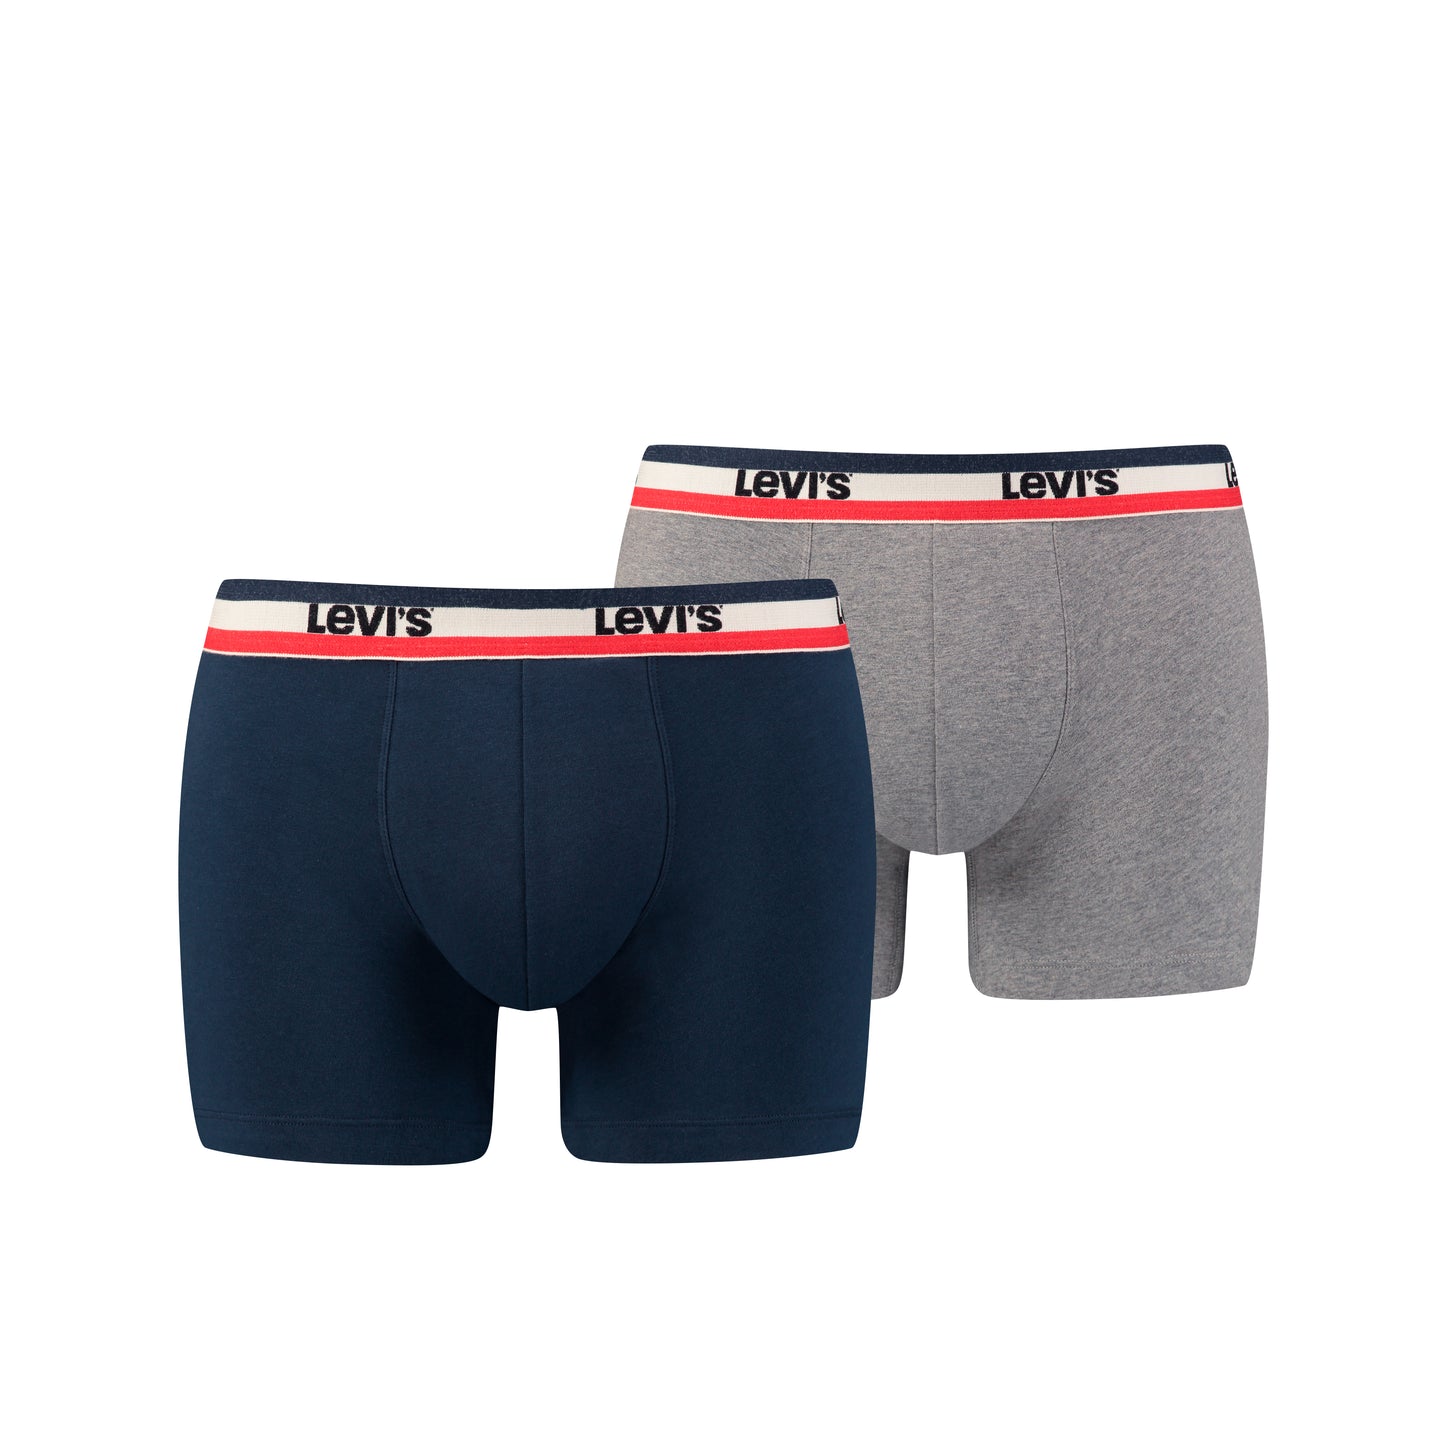 Levi's 905005001 198 Blue Boxer Brief Two Pack